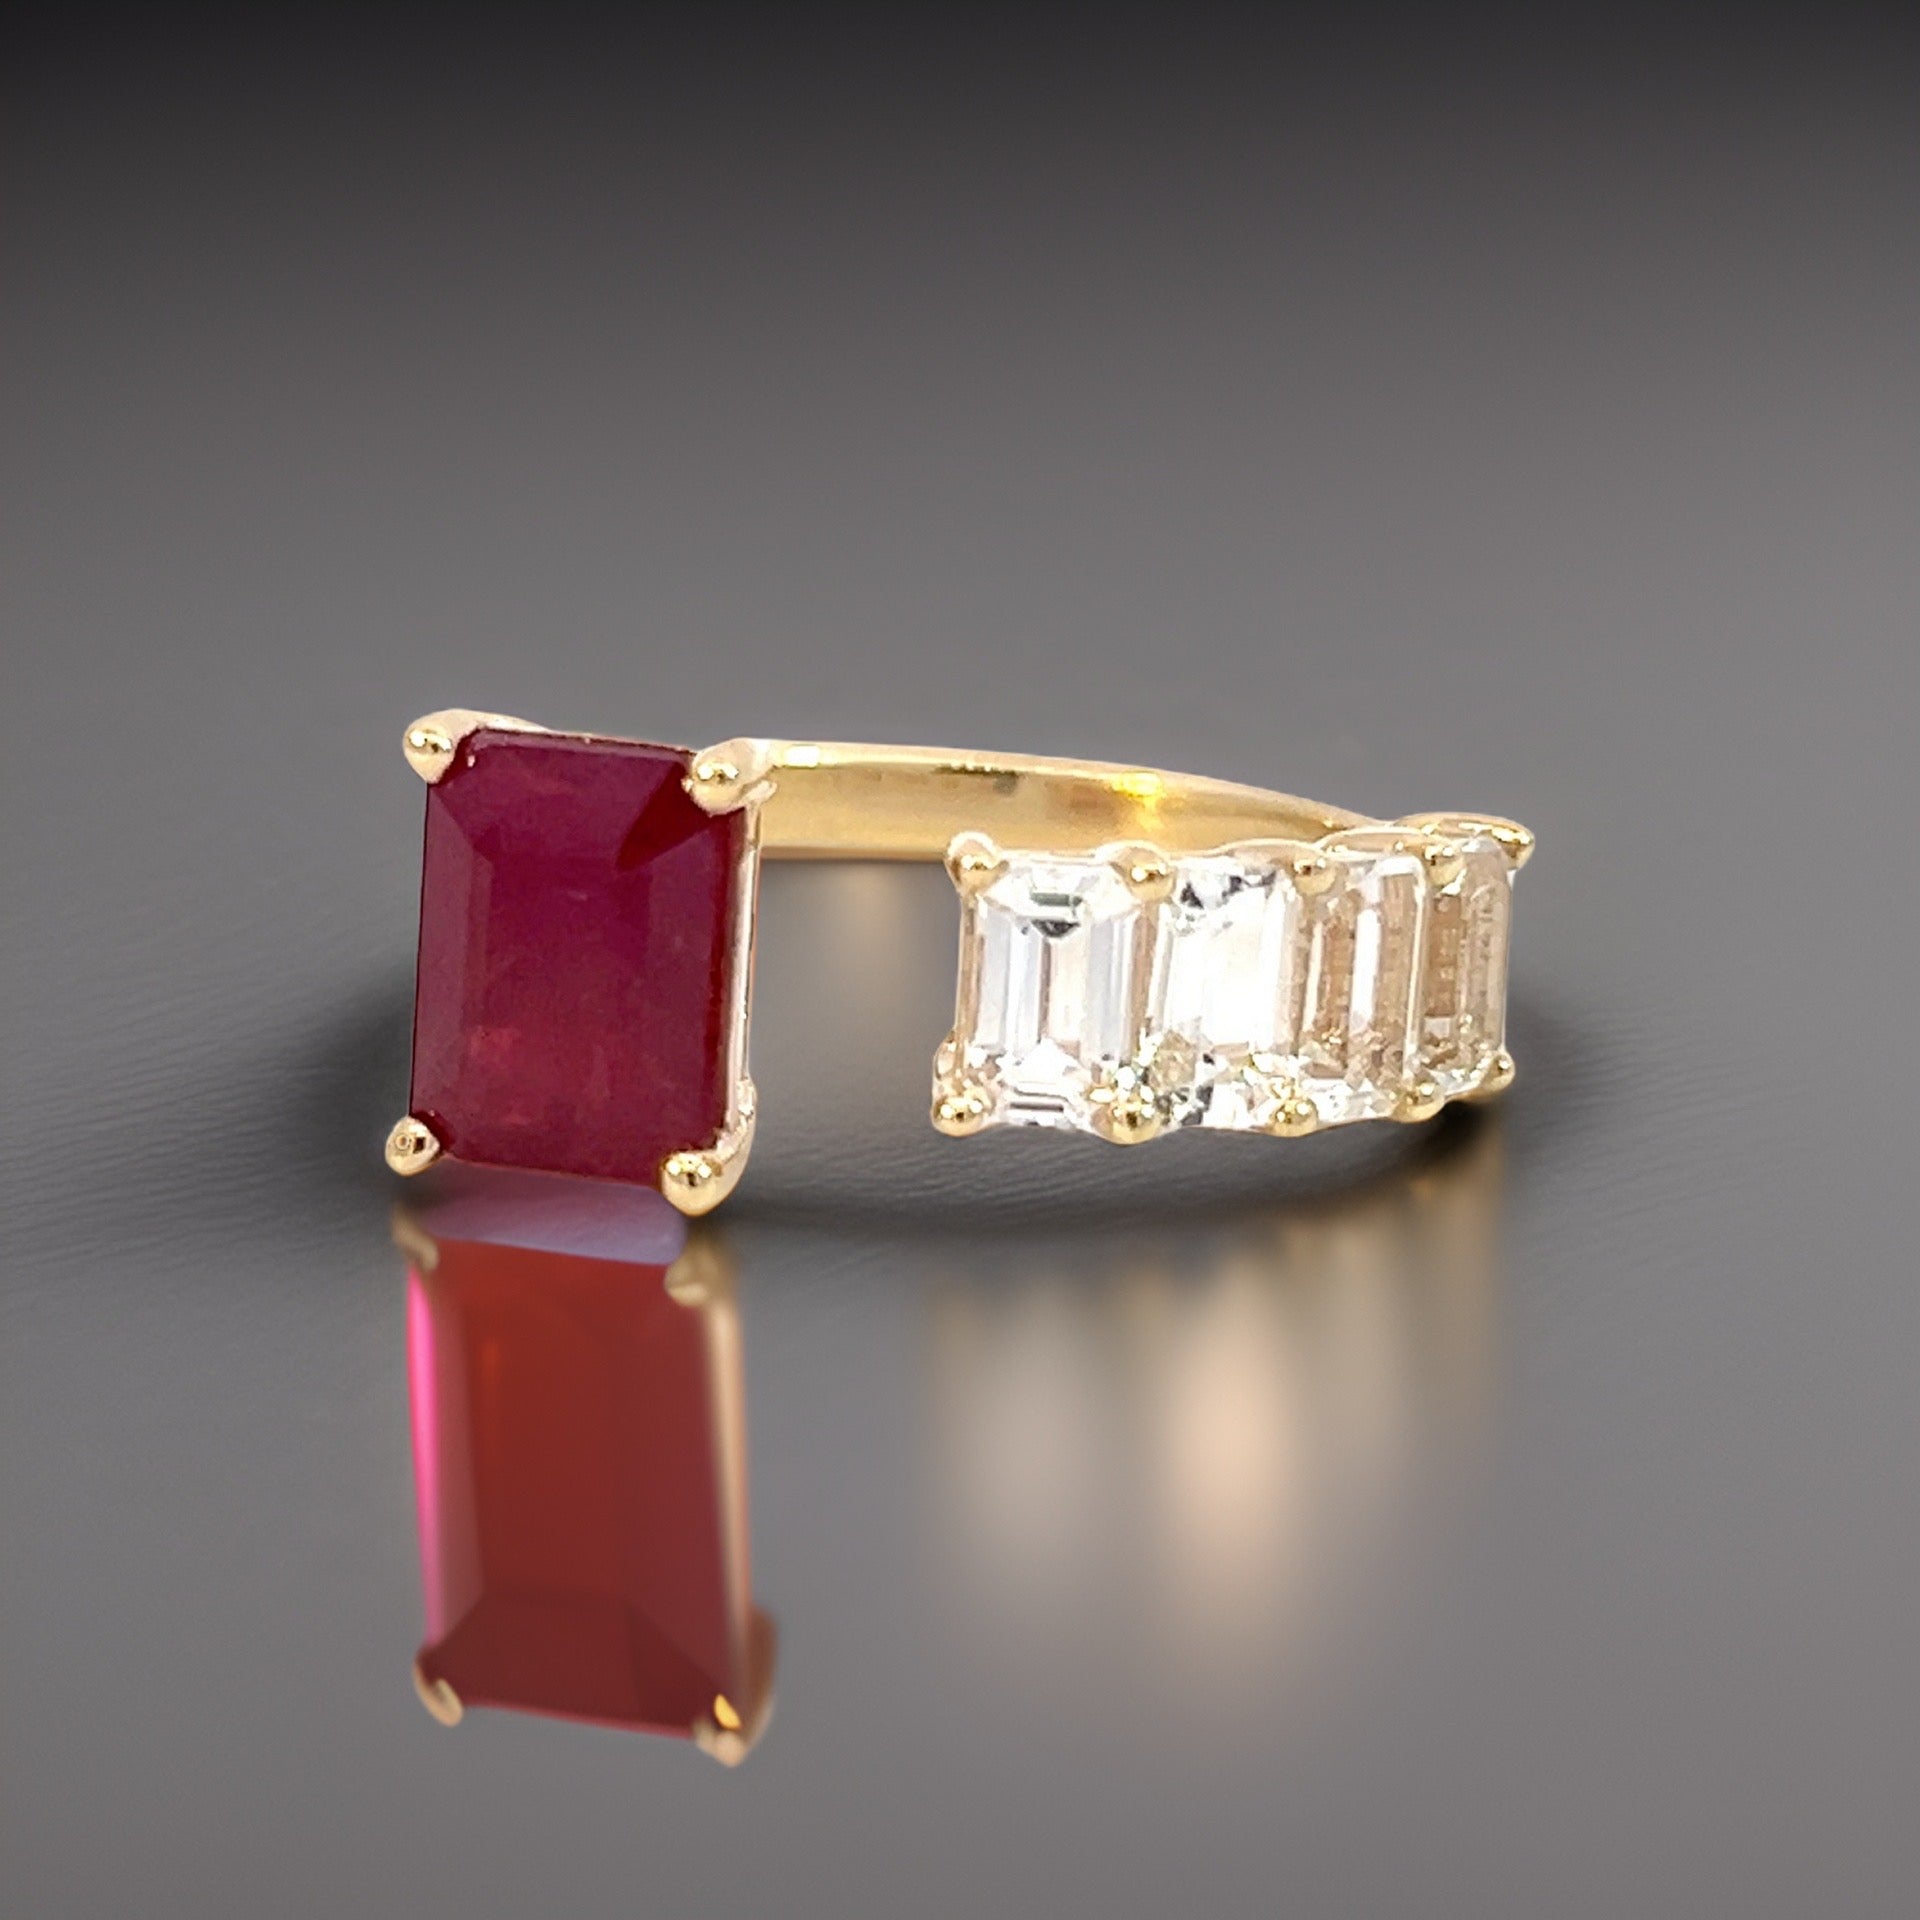 Natural Ruby Sapphire Ring 6.5 14k W Gold 3.64 TCW Certified $4,950 310635 - Certified Fine Jewelry